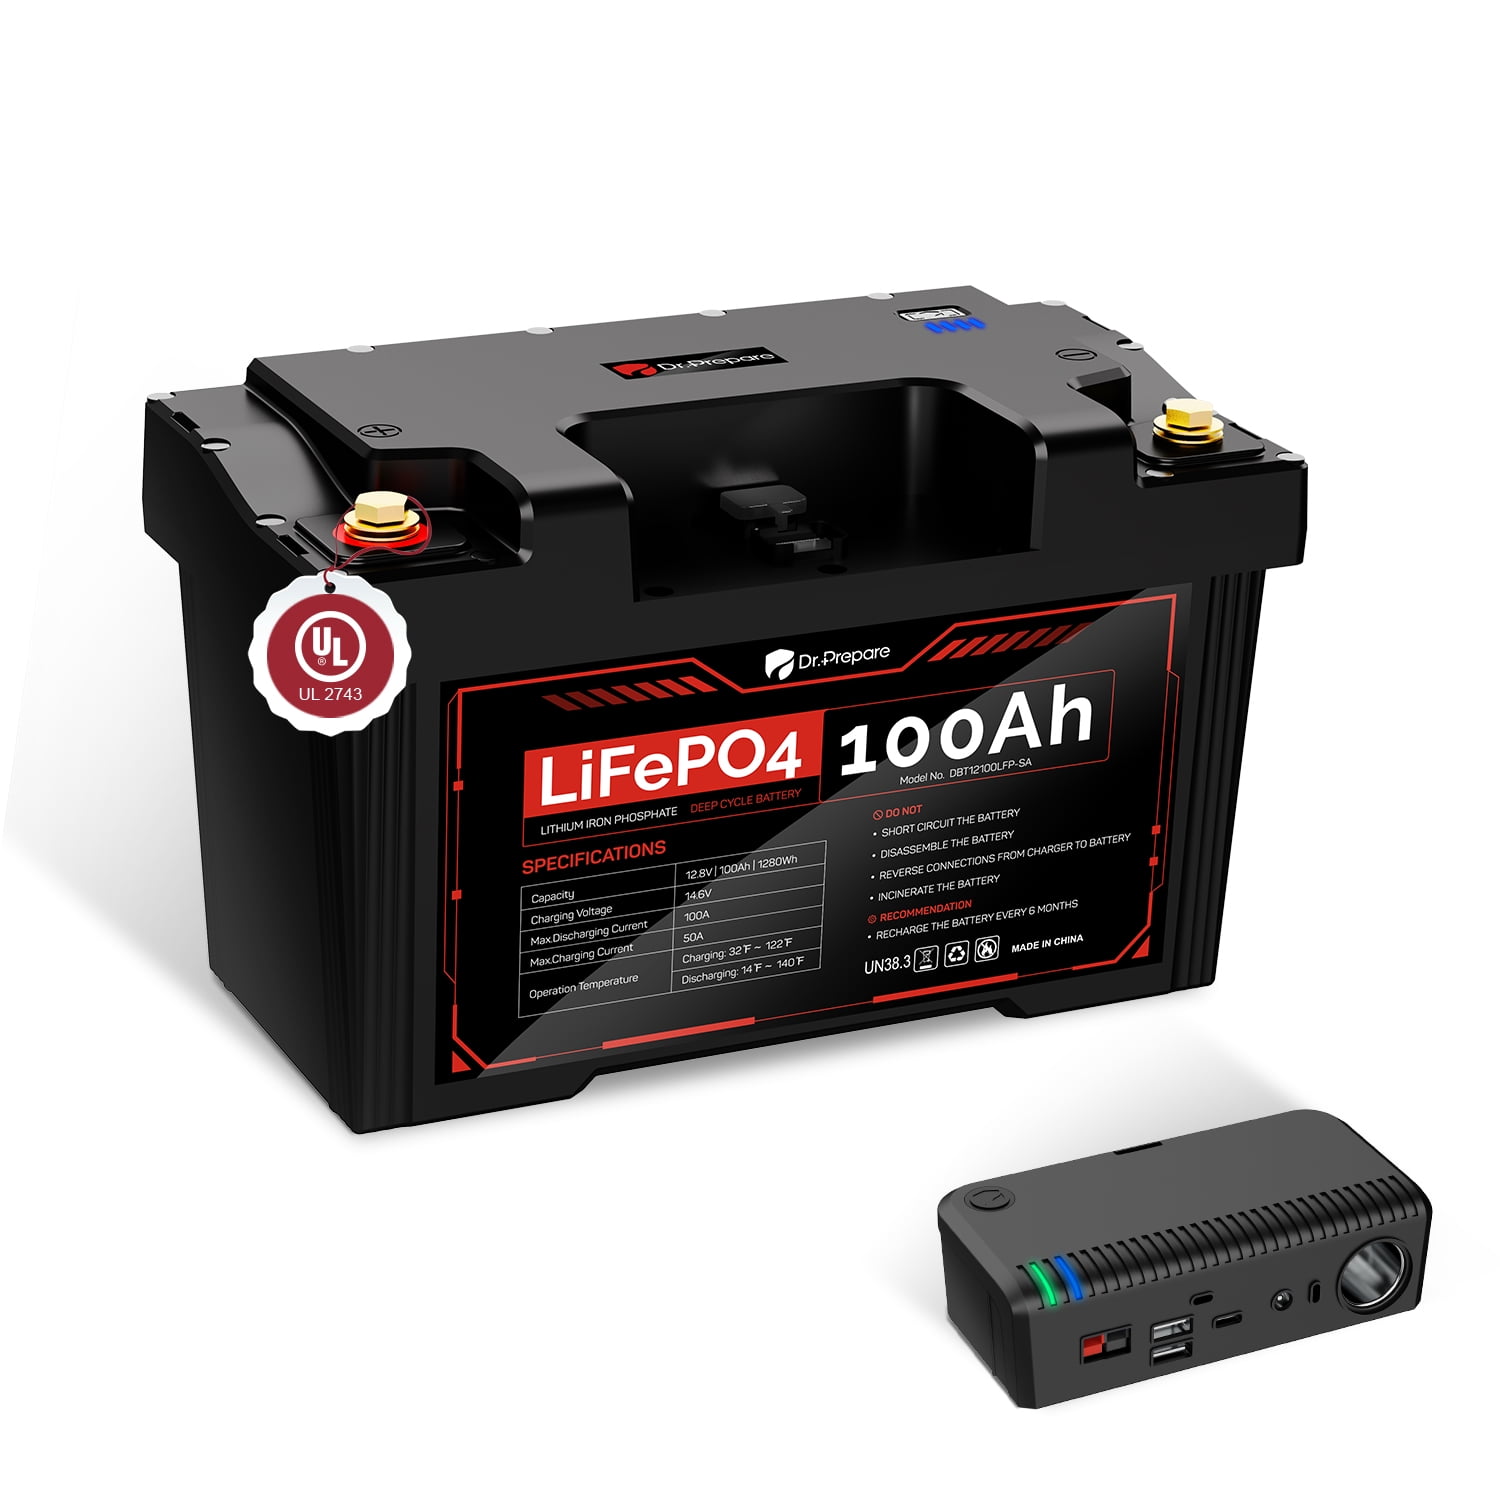 Dr. Prepare 12V 100Ah LiFePO4 Battery with Hub, 1280Wh Portable